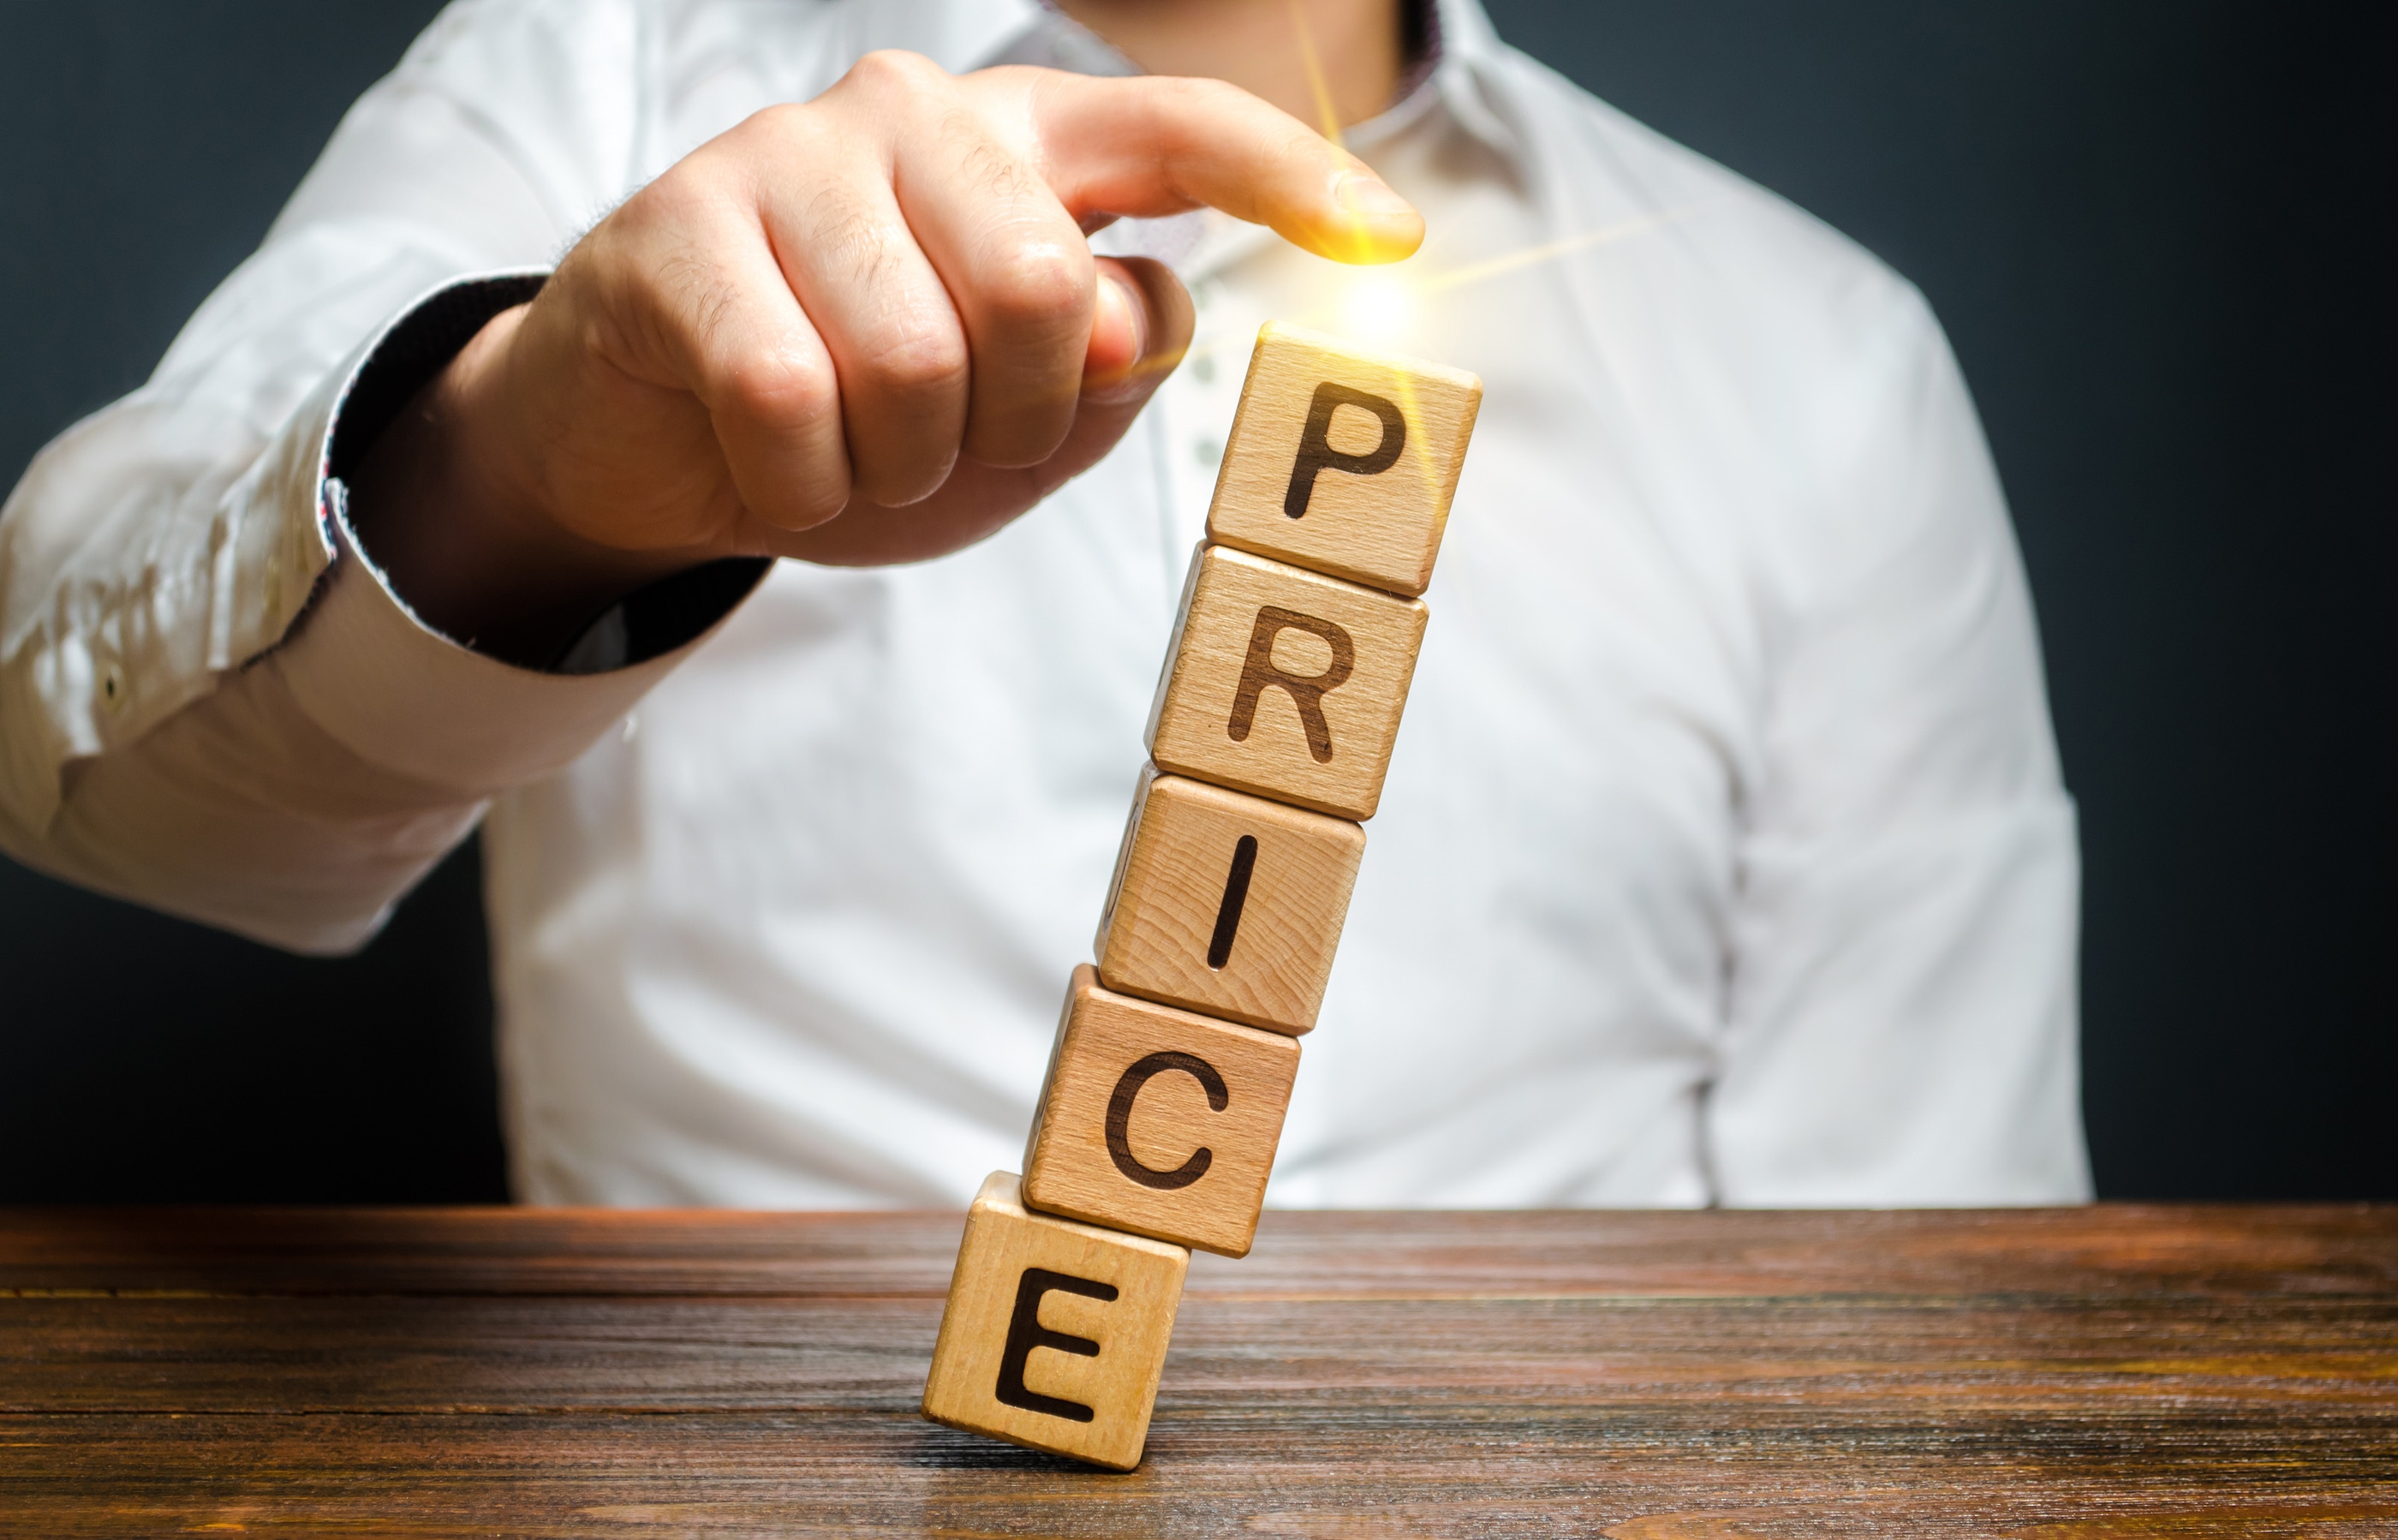 Standard Managed IT Services Pricing Models